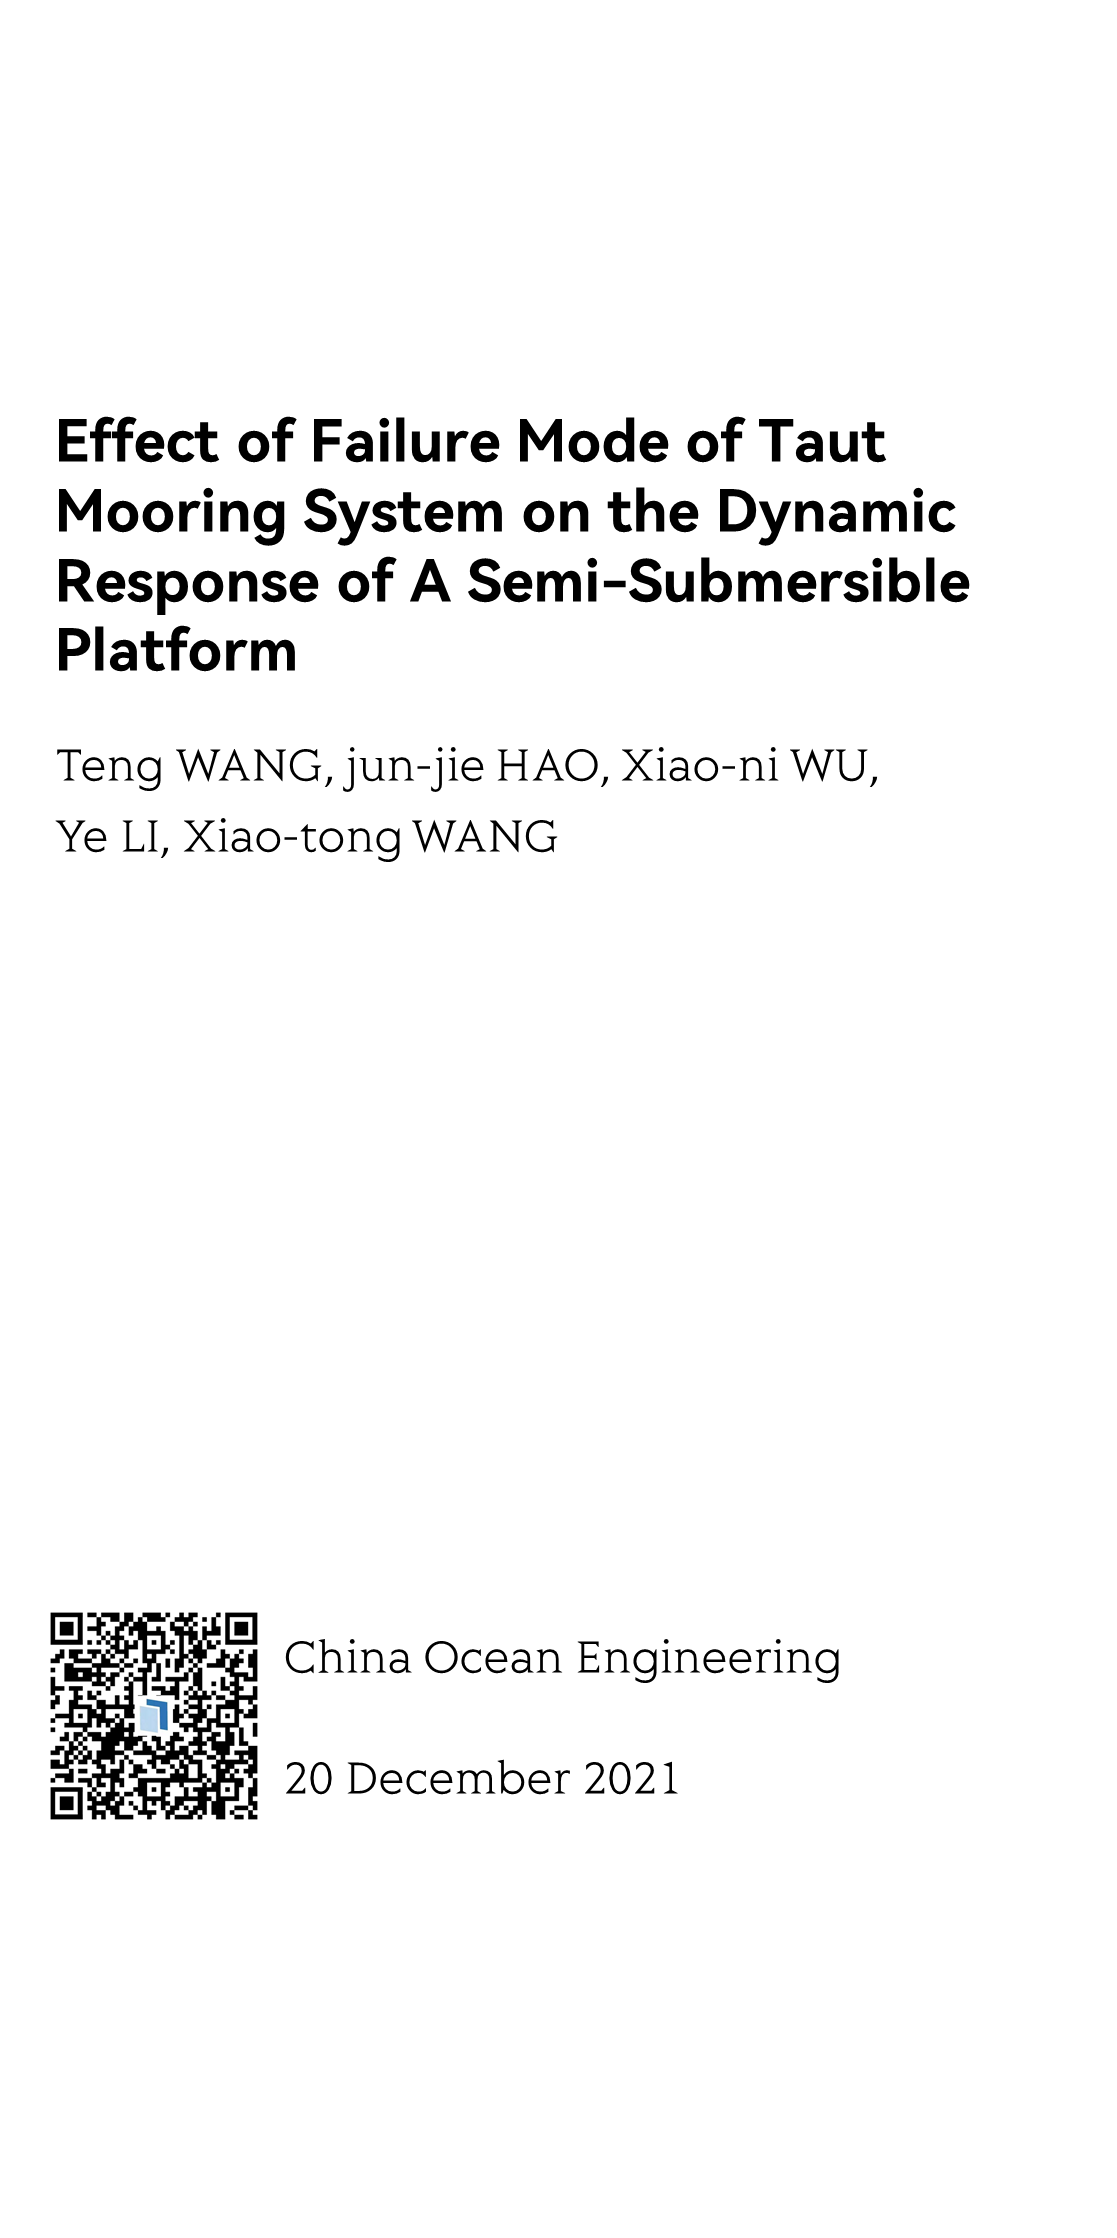 Effect of Failure Mode of Taut Mooring System on the Dynamic Response of A Semi-Submersible Platform_1